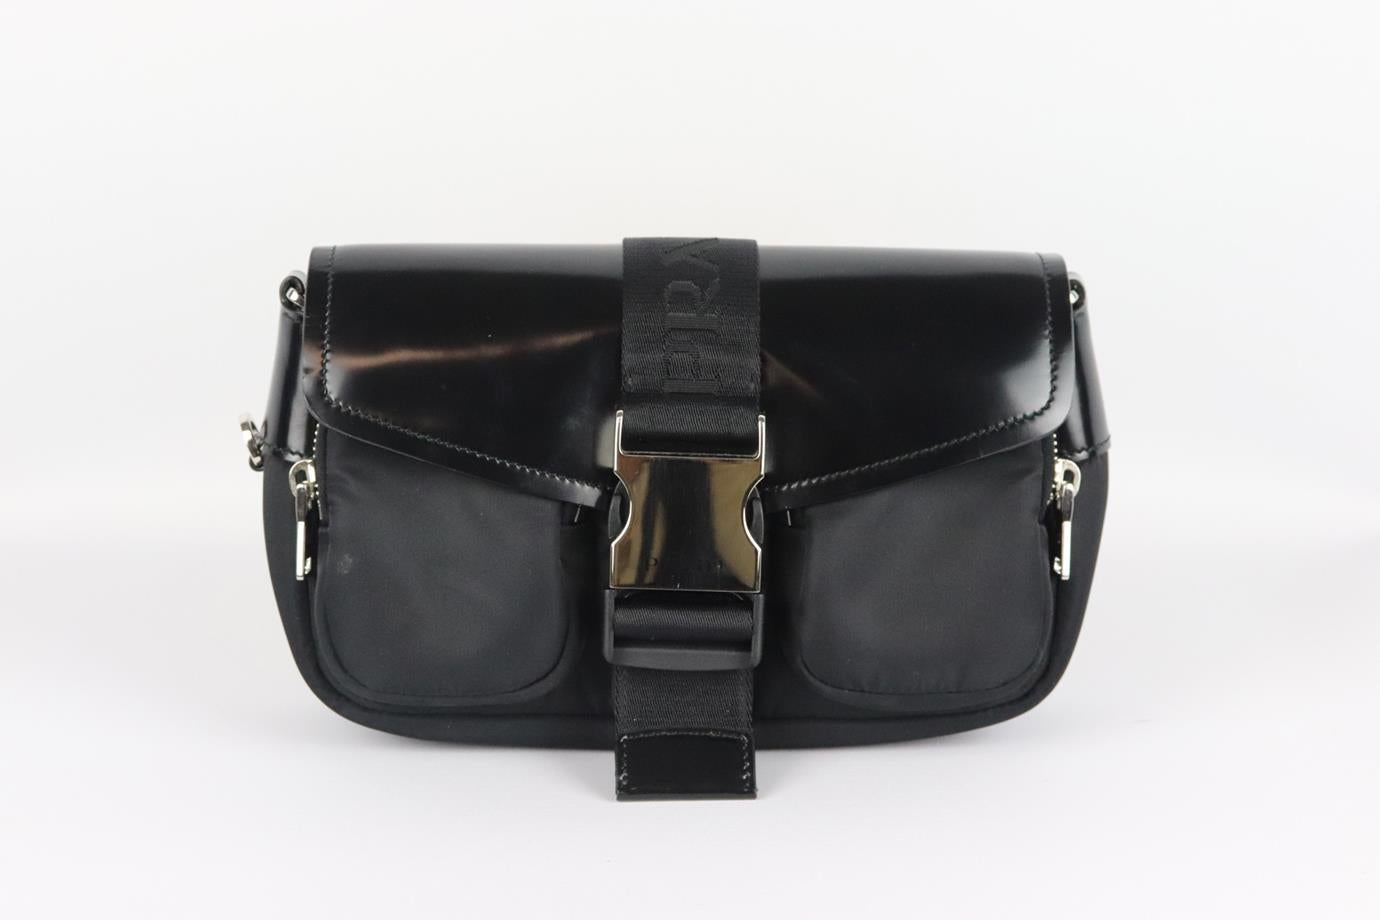 Prada Pocket leather and nylon shoulder bag. Black. Buckle fastening at front. Does not come with dustbag or box. Height: 6.4 in. Width: 2 in. Depth: 5 in. Strap Drop: 34 in. Very good condition - Barely used. Small mark at front. Light scratching